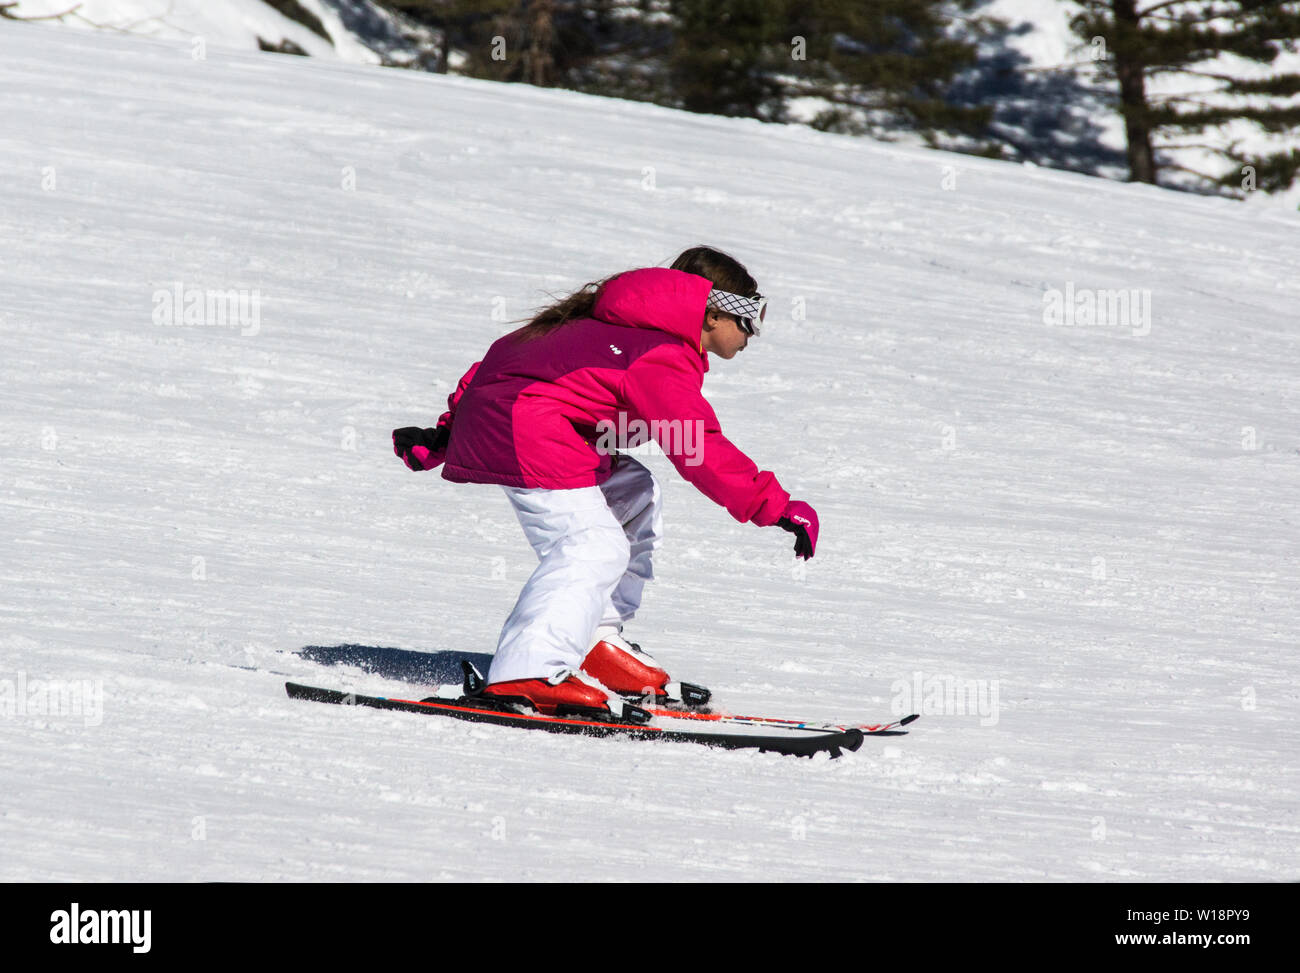 The central Pyrenees at Pont Espagne. Young girl learning to ski on the beginners slope.No sticks. Stock Photo